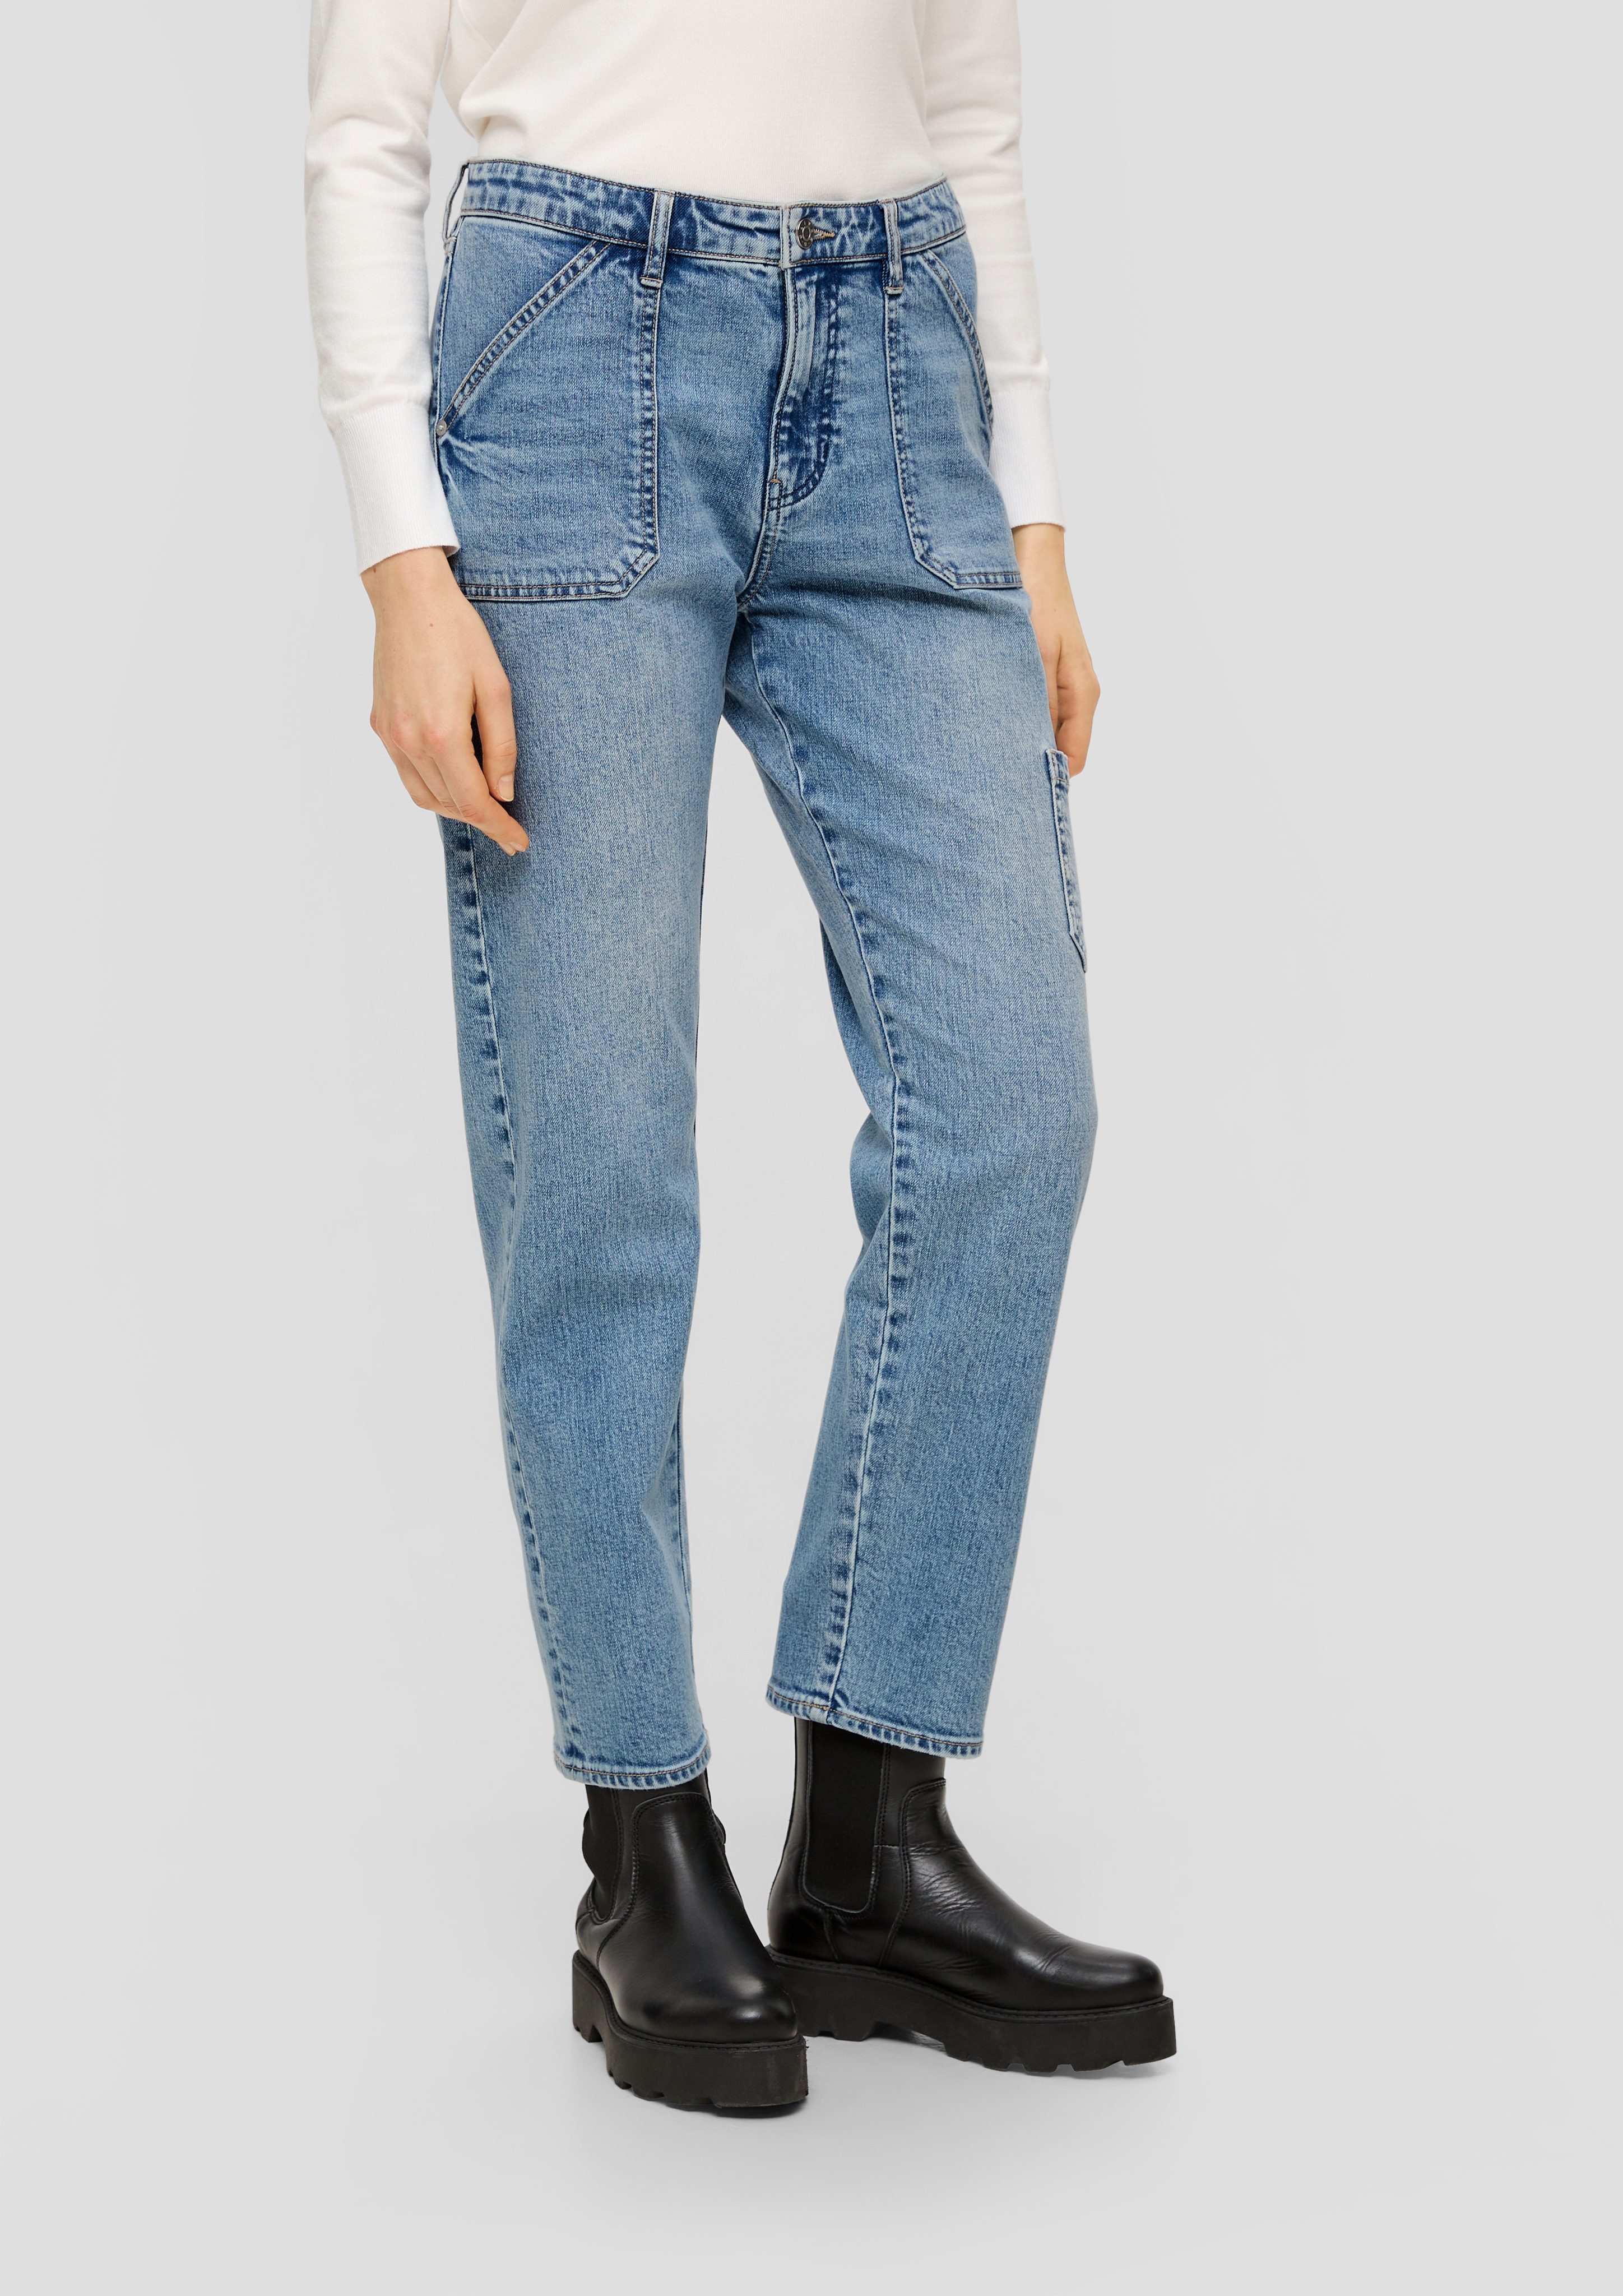 Slim / Straight Mid / s.Oliver Waschung Rise Relaxed Boyfriend 7/8-Jeans / Ankle Leg Fit Jeans Label-Patch,